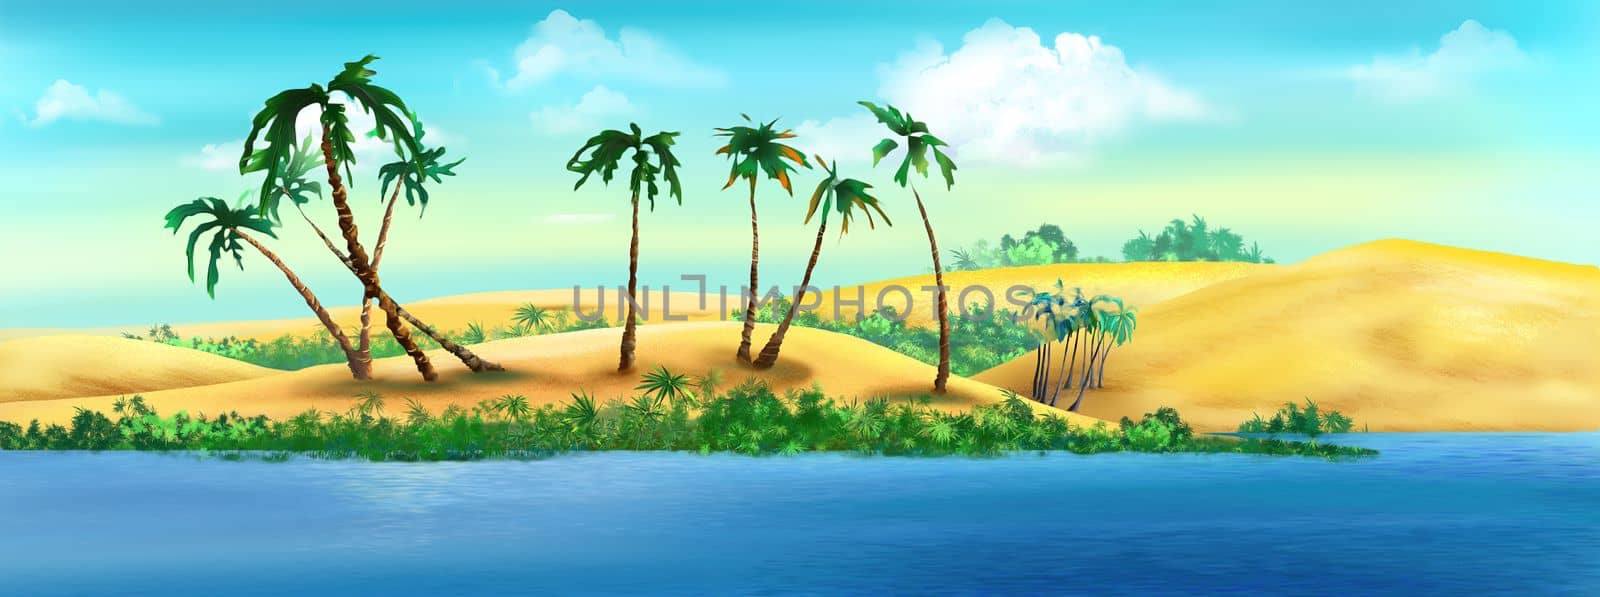 Palm trees on a sandy river bank at day. Digital Painting Background, Illustration.